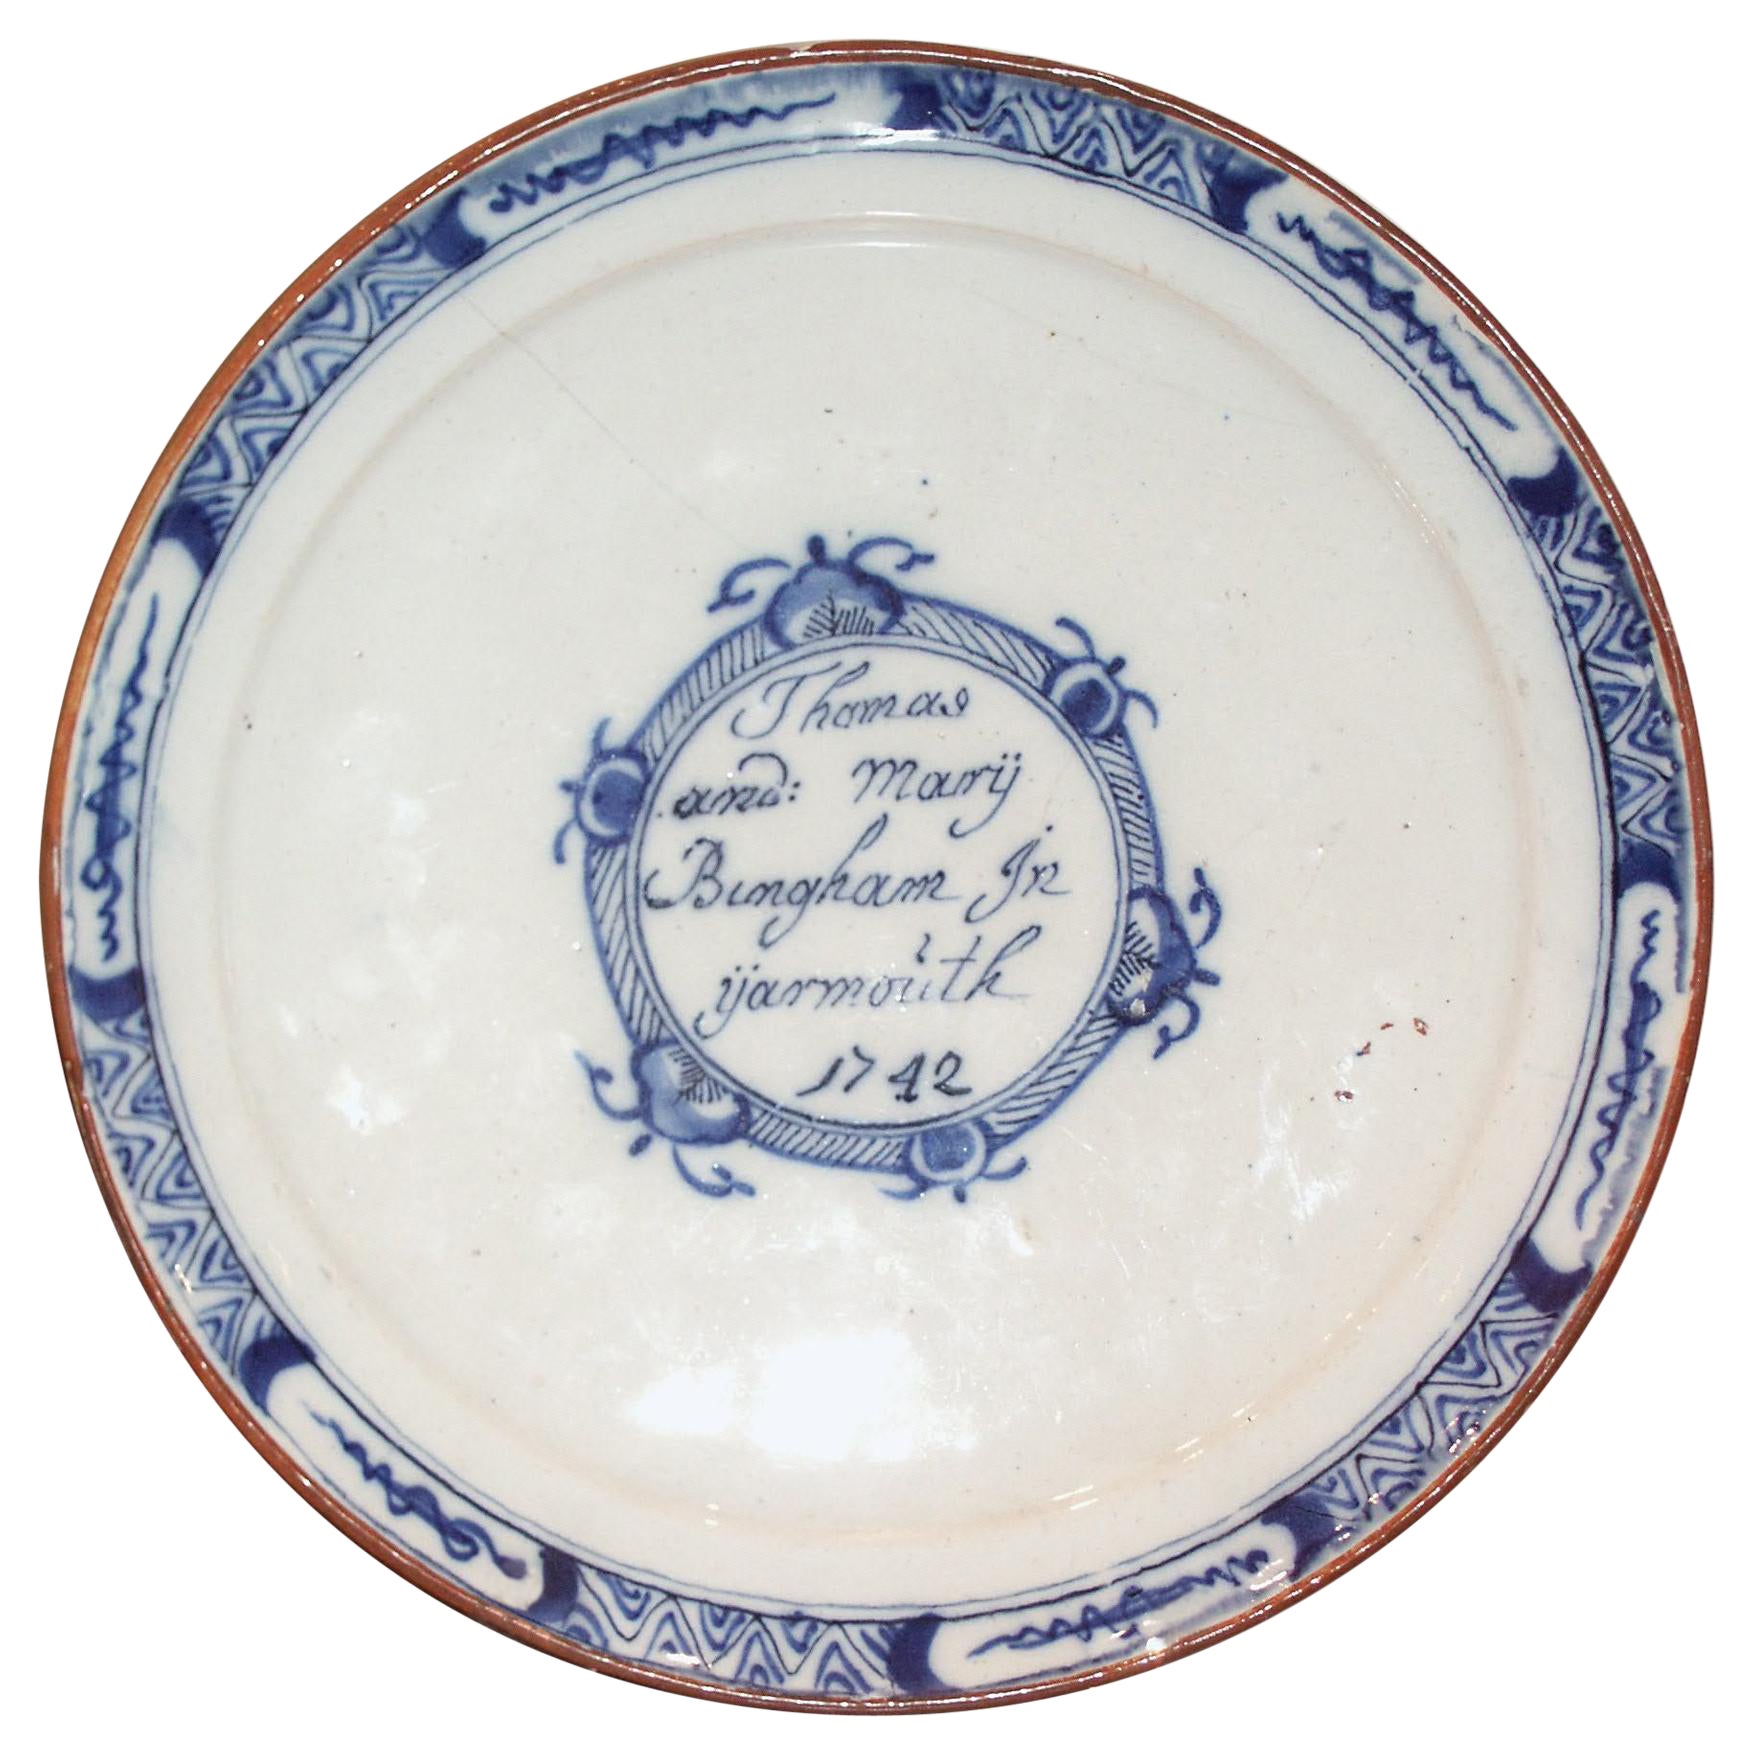 Plate, Delftware, 1742, Dutch, Thomas and Mary Bingham, Yarmouth, 1742, Suffolk For Sale